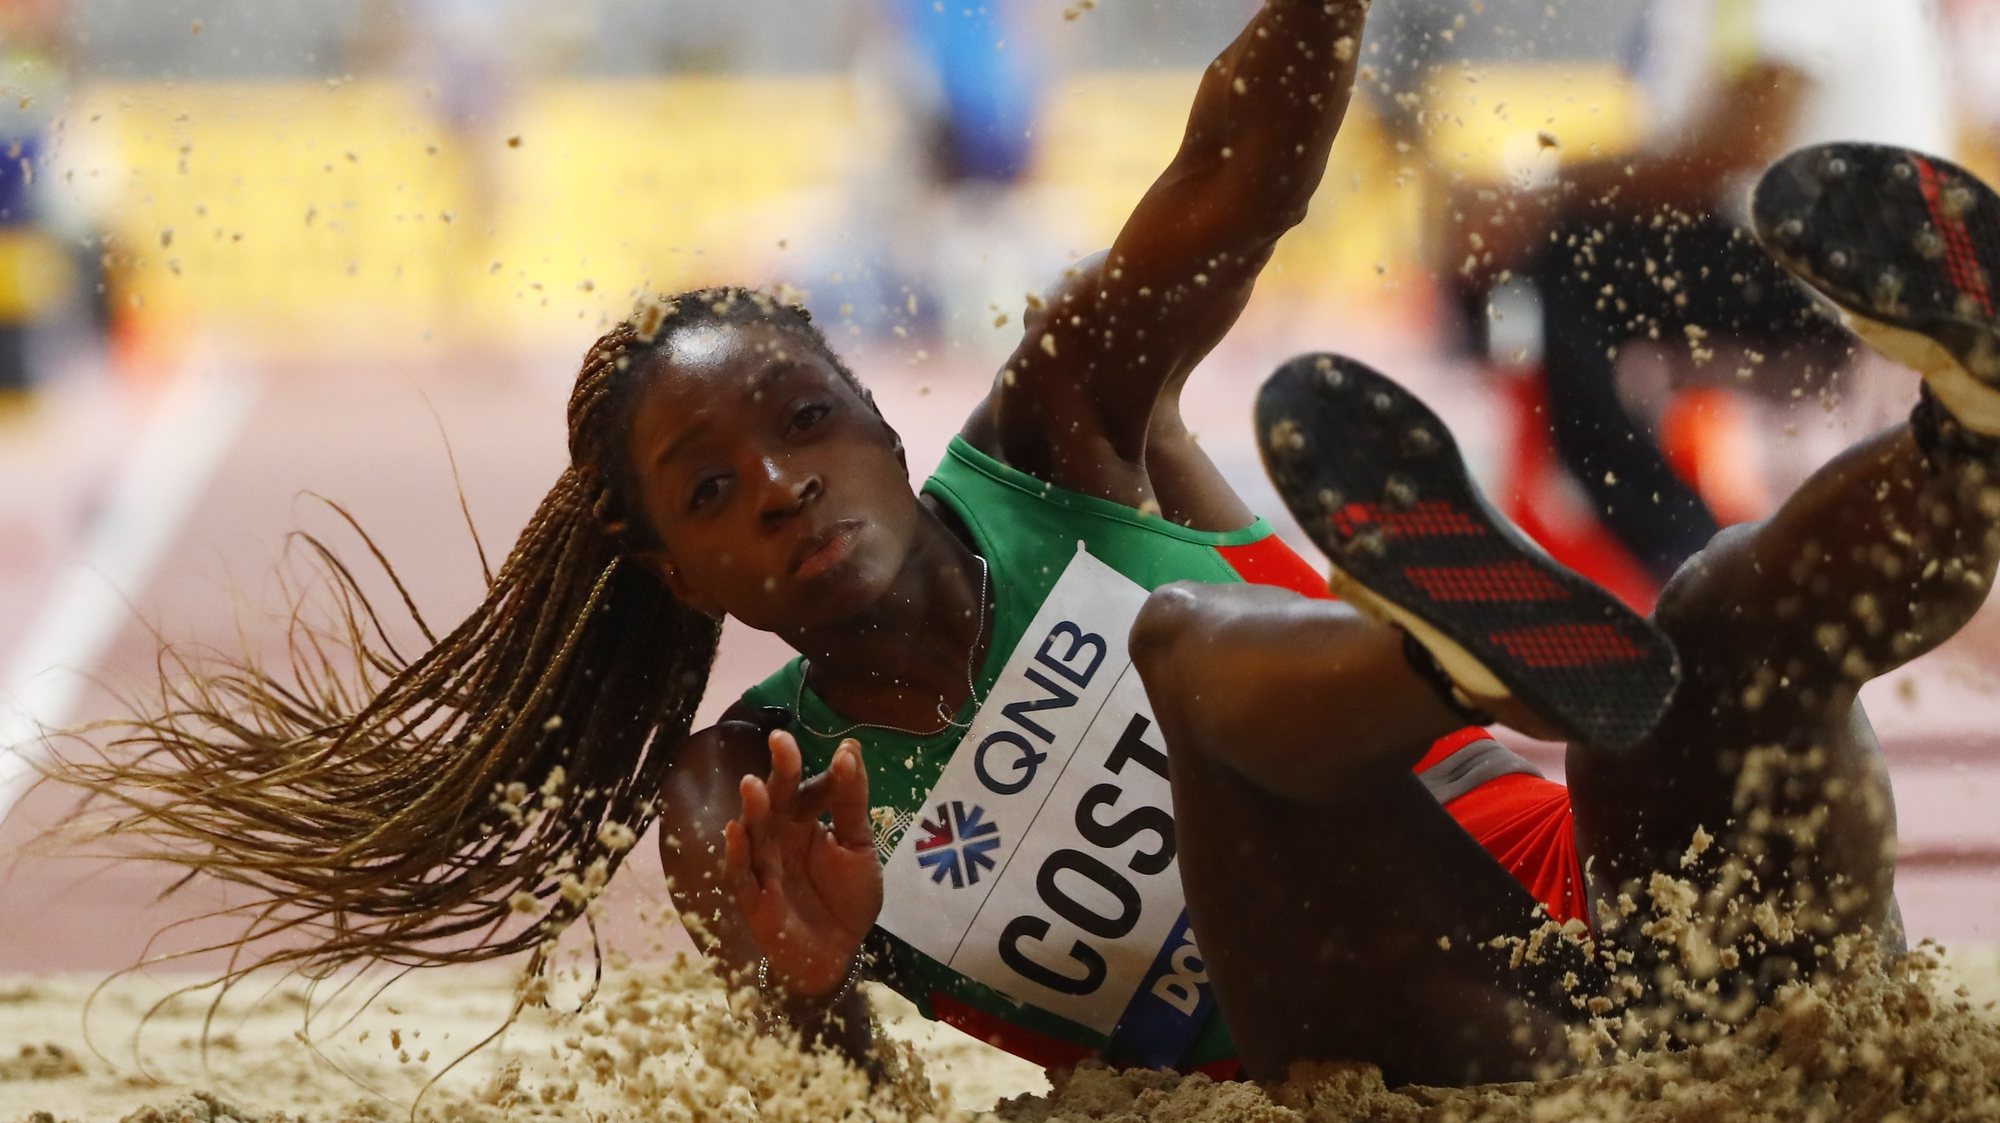 epa07892316 Susana Costa of Portugal competes in the women&#039;s Triple Jump qualification during the IAAF World Athletics Championships 2019 at the Khalifa Stadium in Doha, Qatar, 03 October 2019. EPA/DIEGO AZUBEL